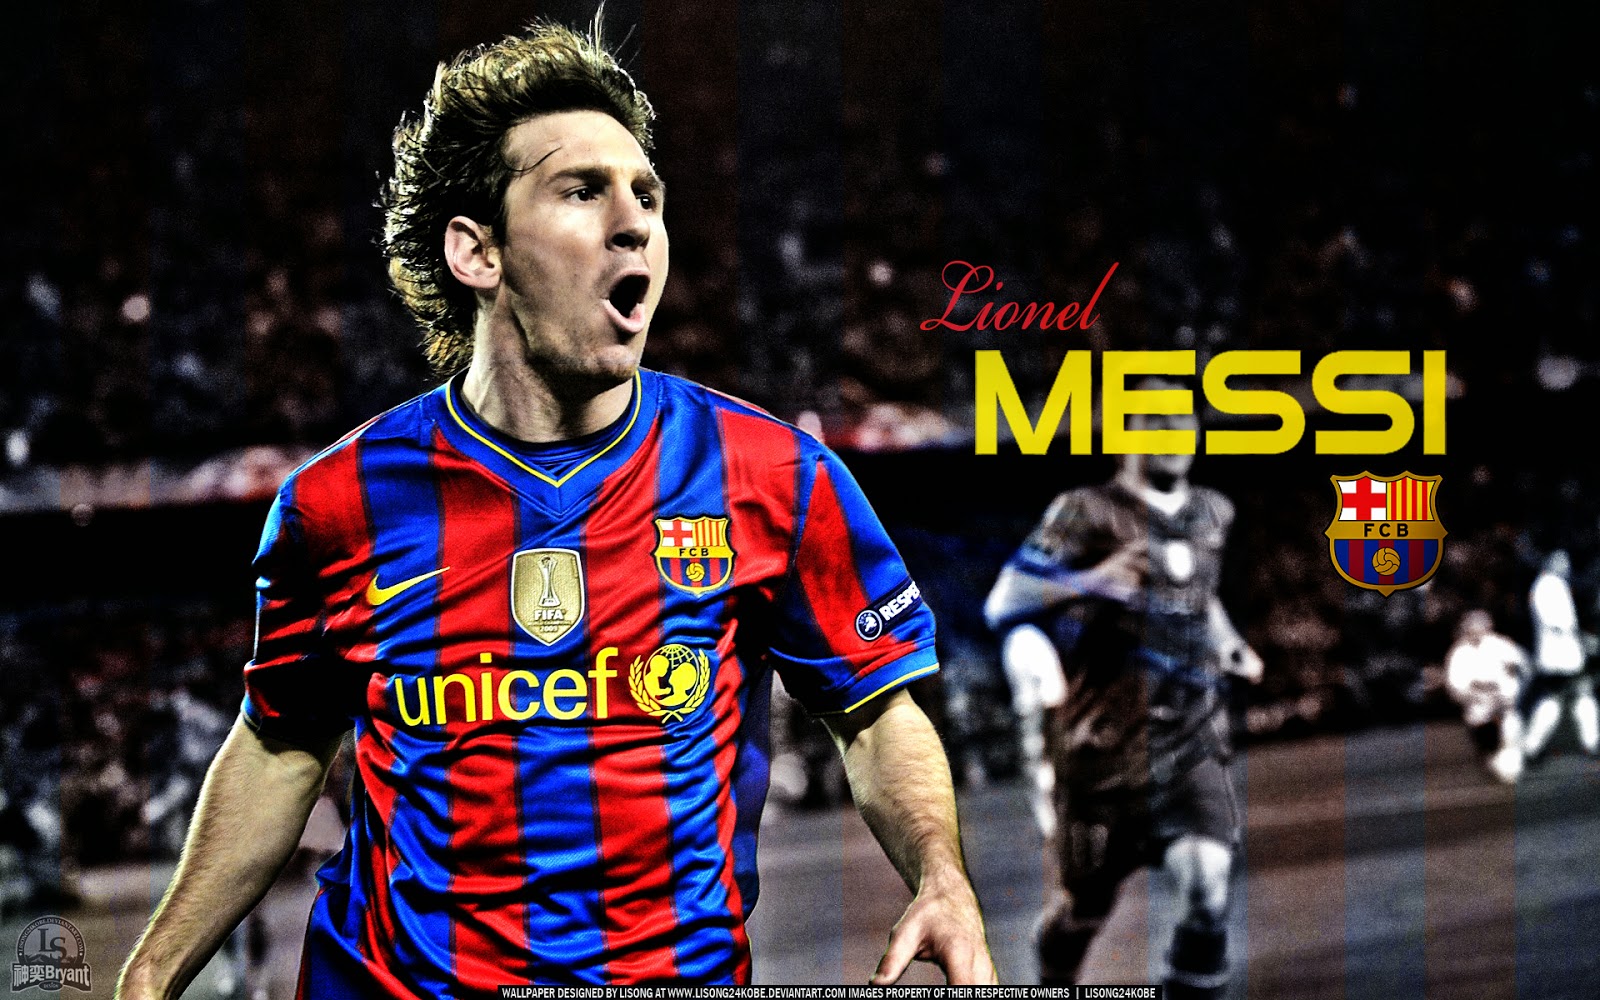 Lionel Messi HQ Wallpapers 2014 2015